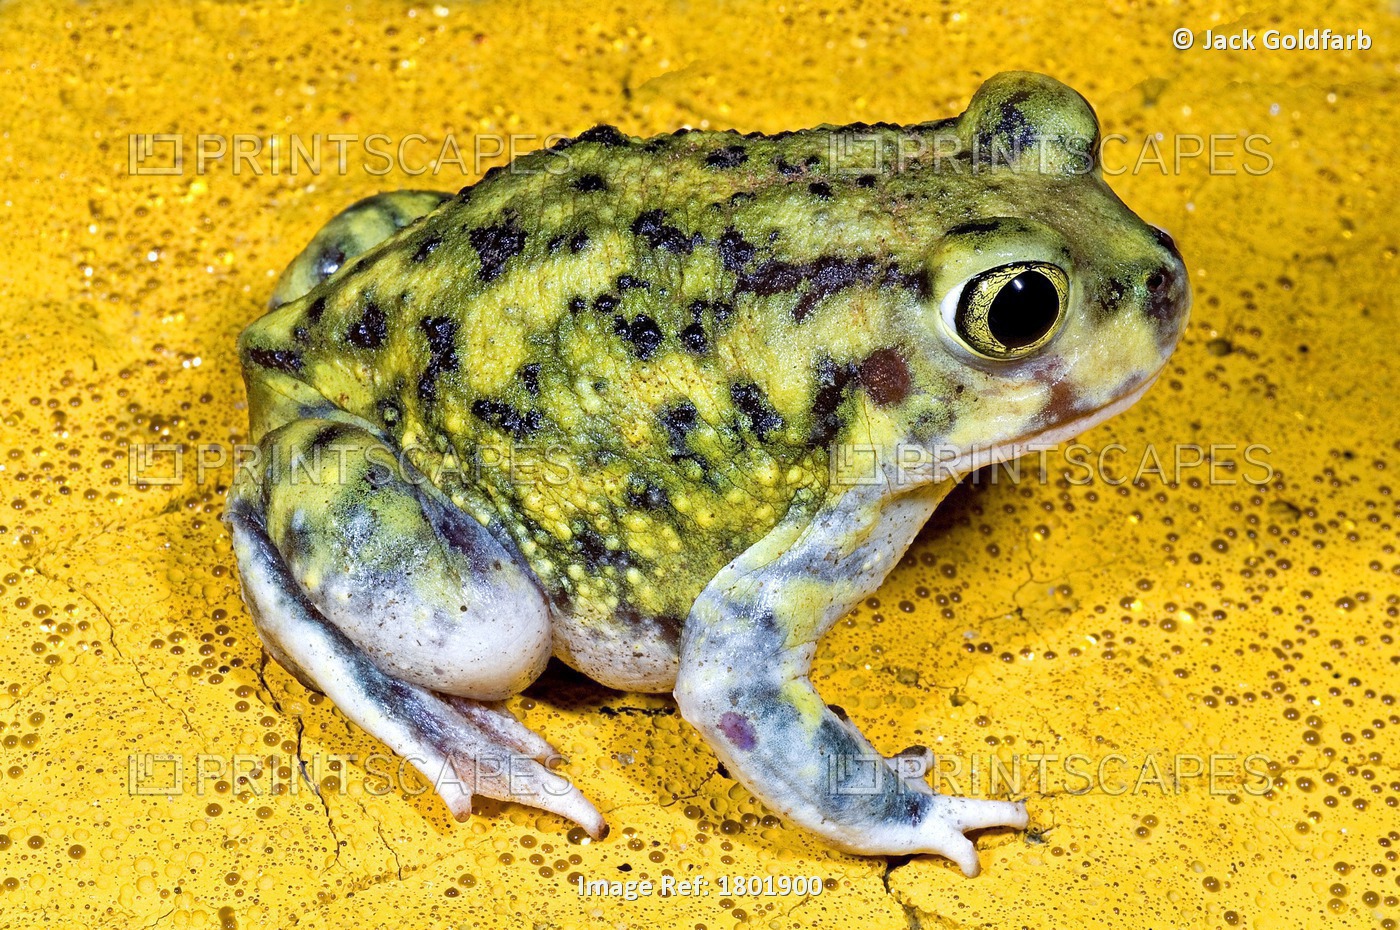 A Spadefoot Toad